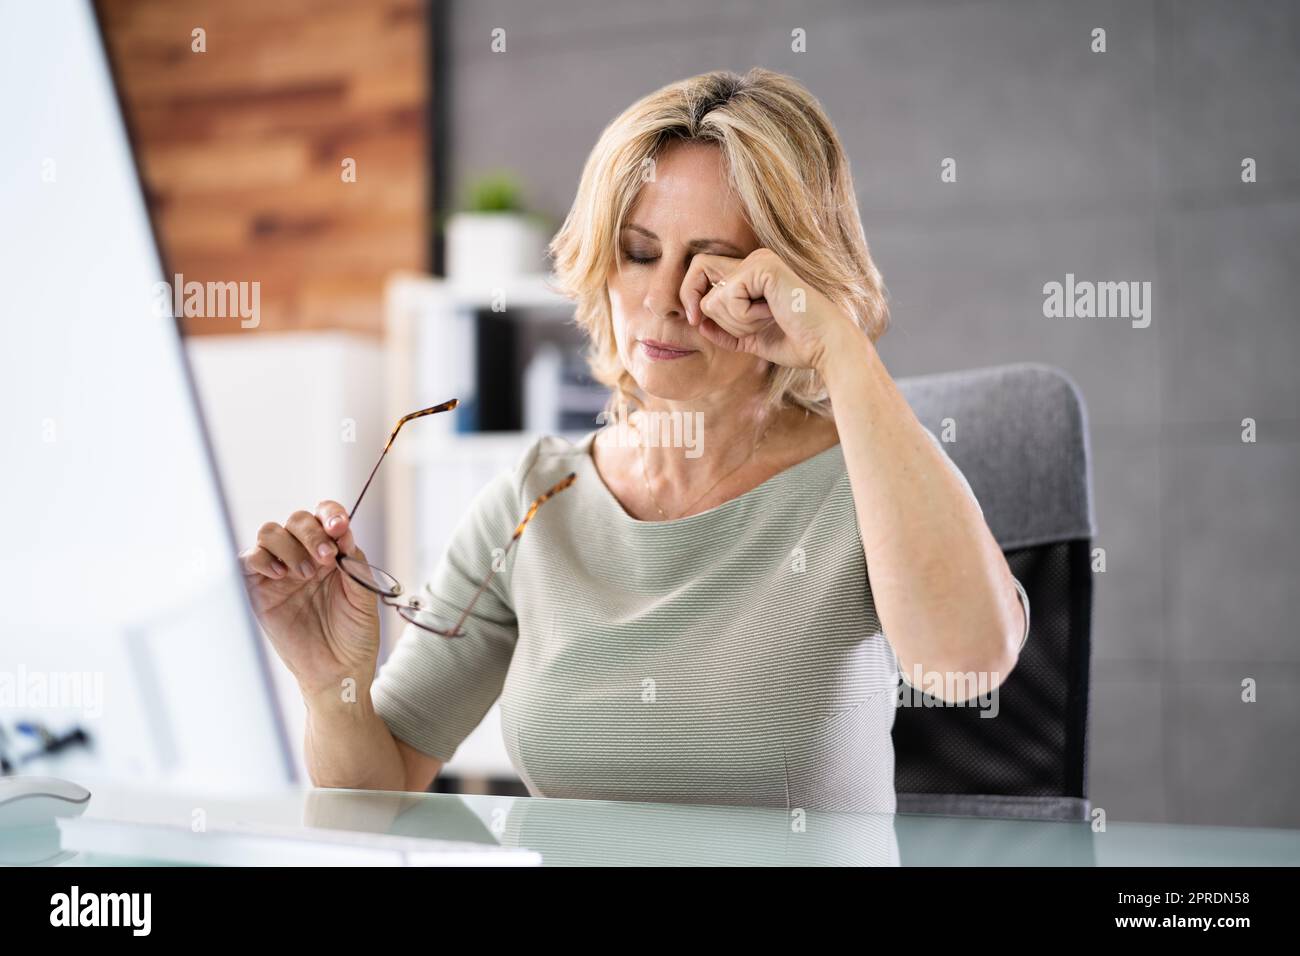 Woman Eye Fatigue And Pain. Tired Working Stock Photo